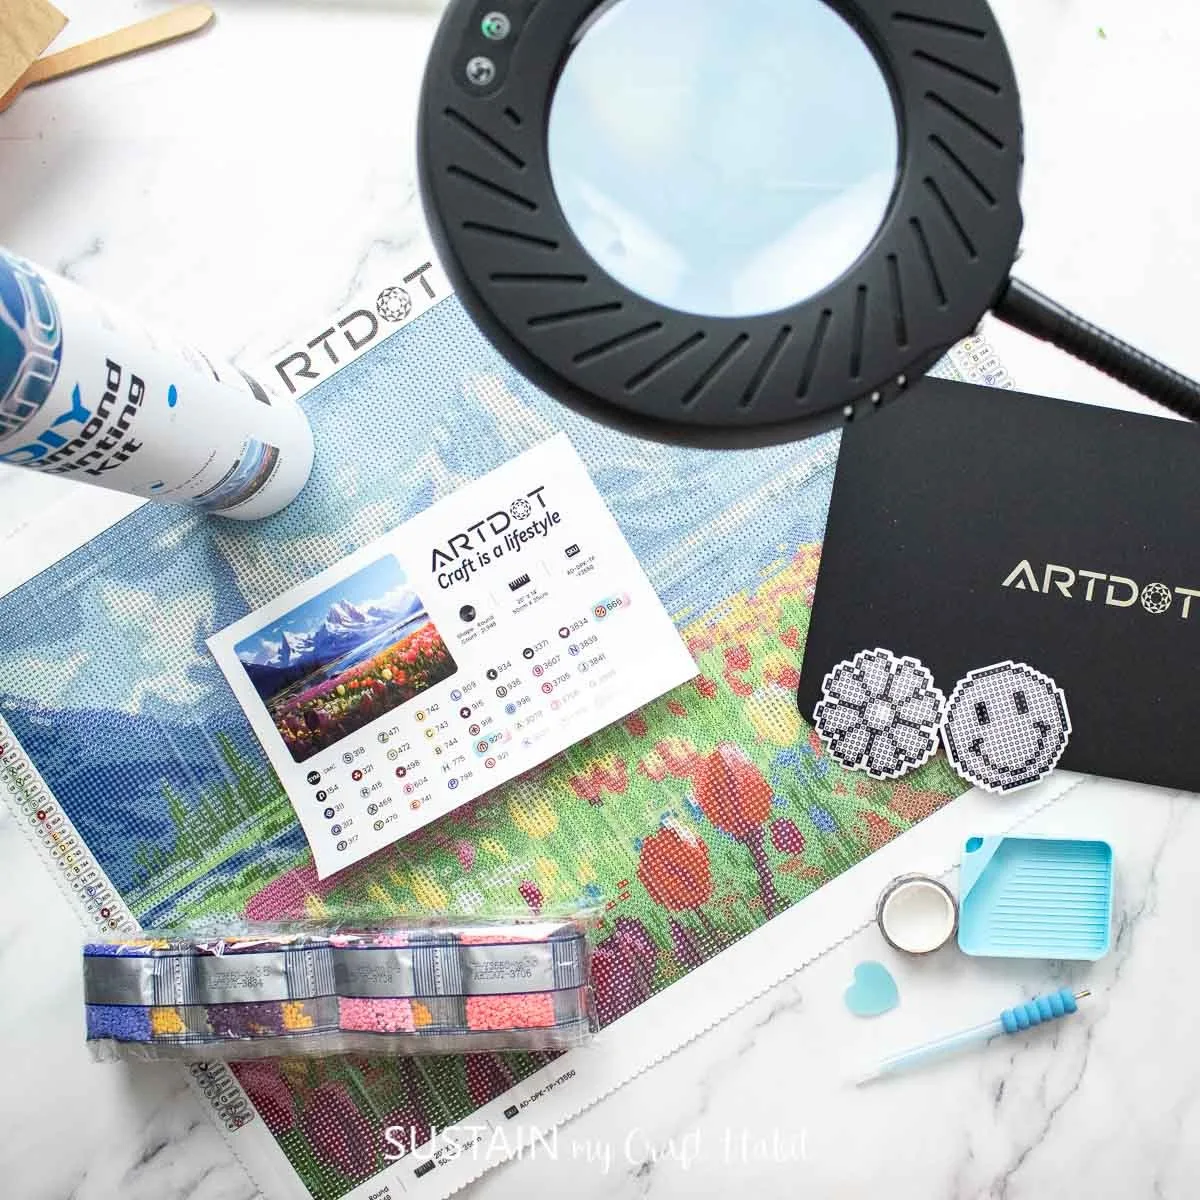 Various supplies from ARTDOT including a diamong painting kit and magnifying glass with stand.